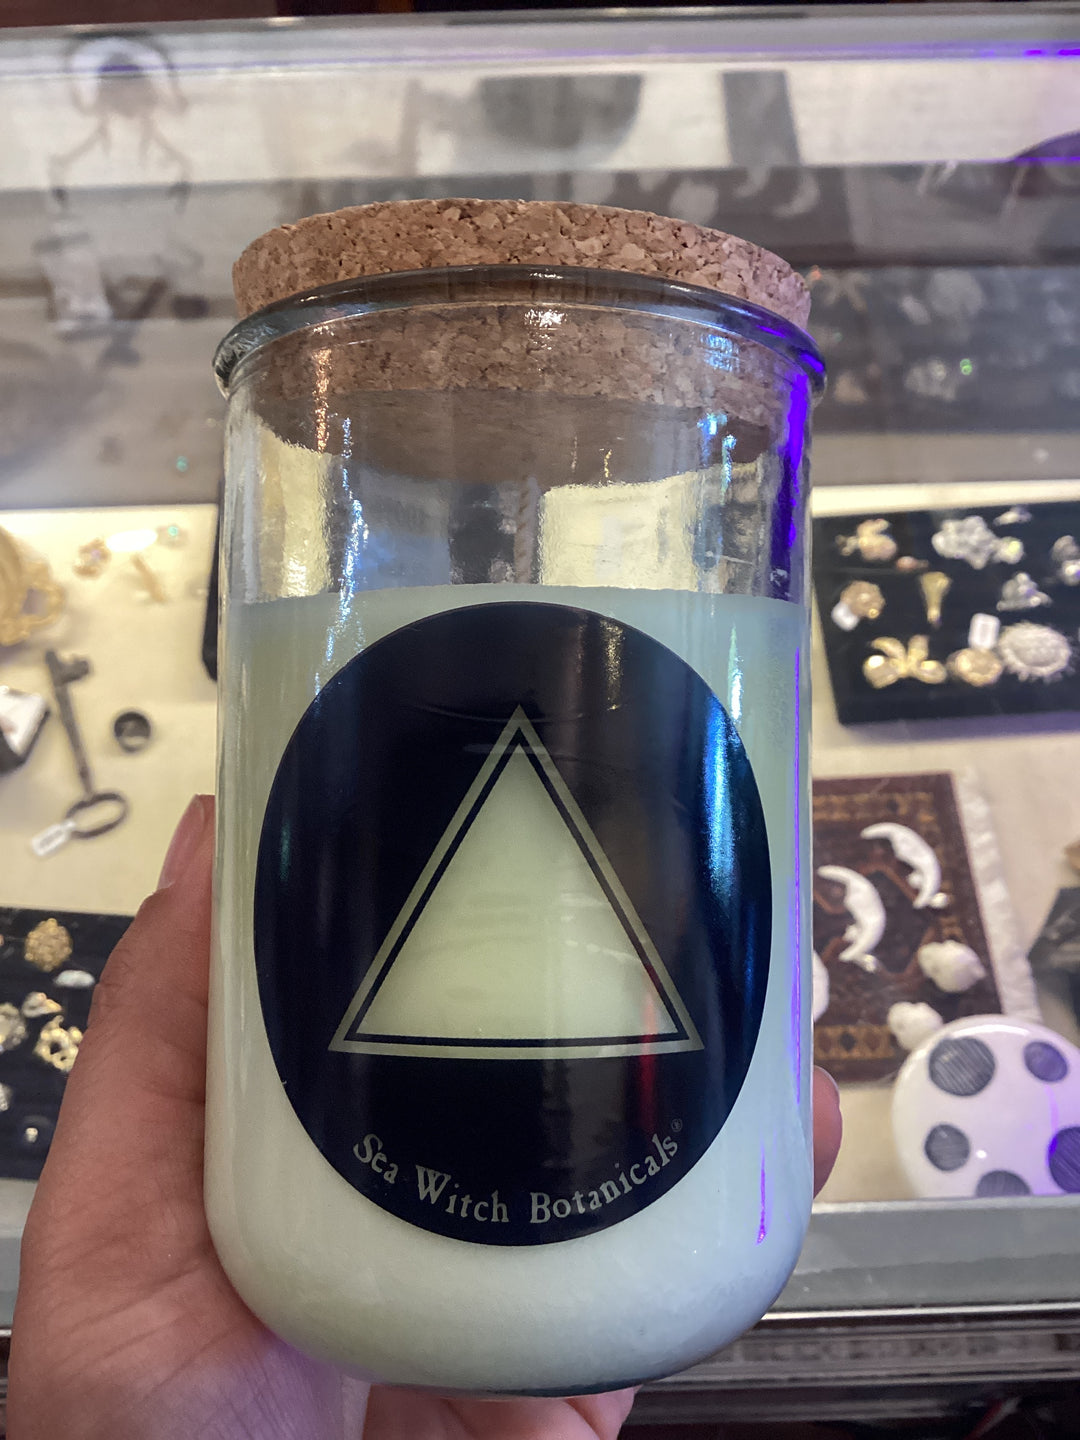 Sea Witch Botanicals- Quoth the Raven Candle